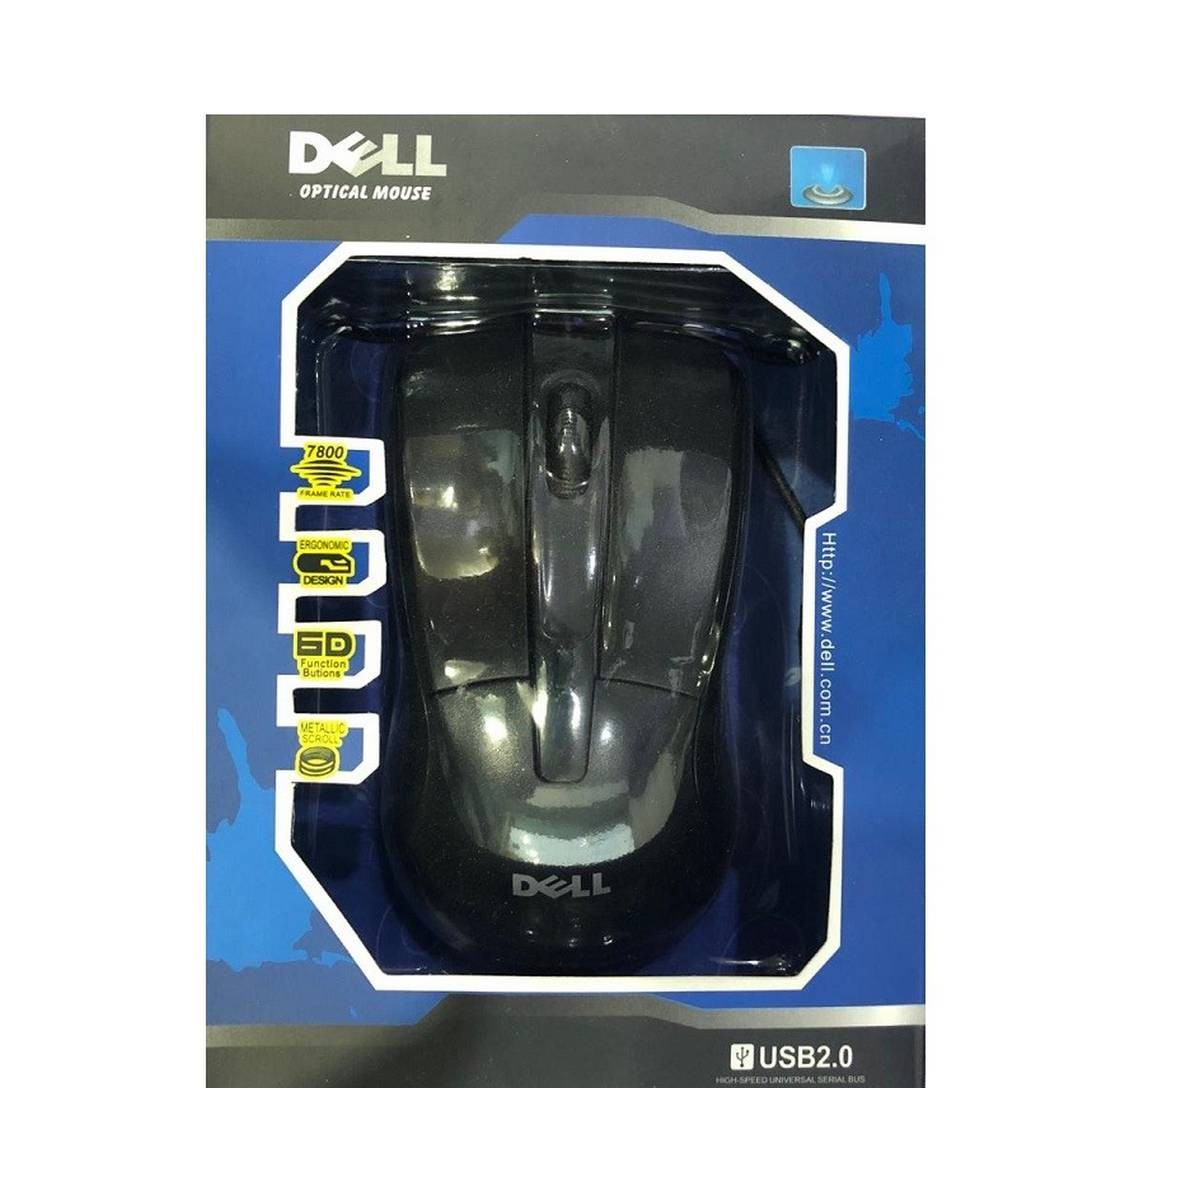 DELL 115 Optical Mouse